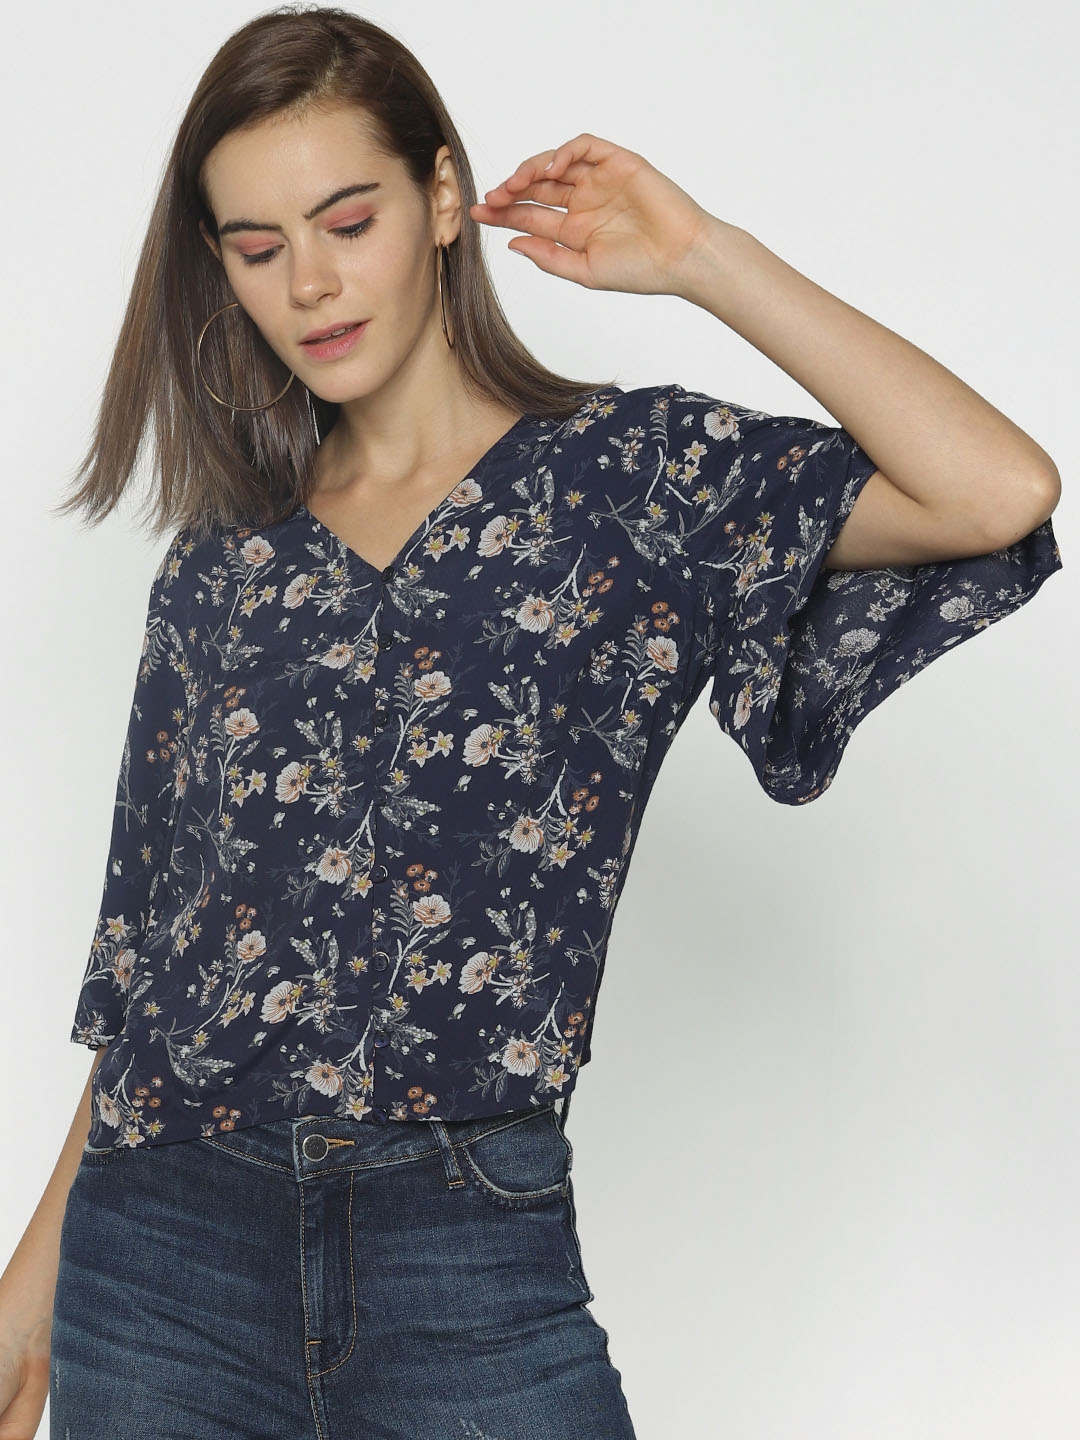 Buy ONLY Women Navy Blue Printed Top - Tops for Women 9547959 | Myntra